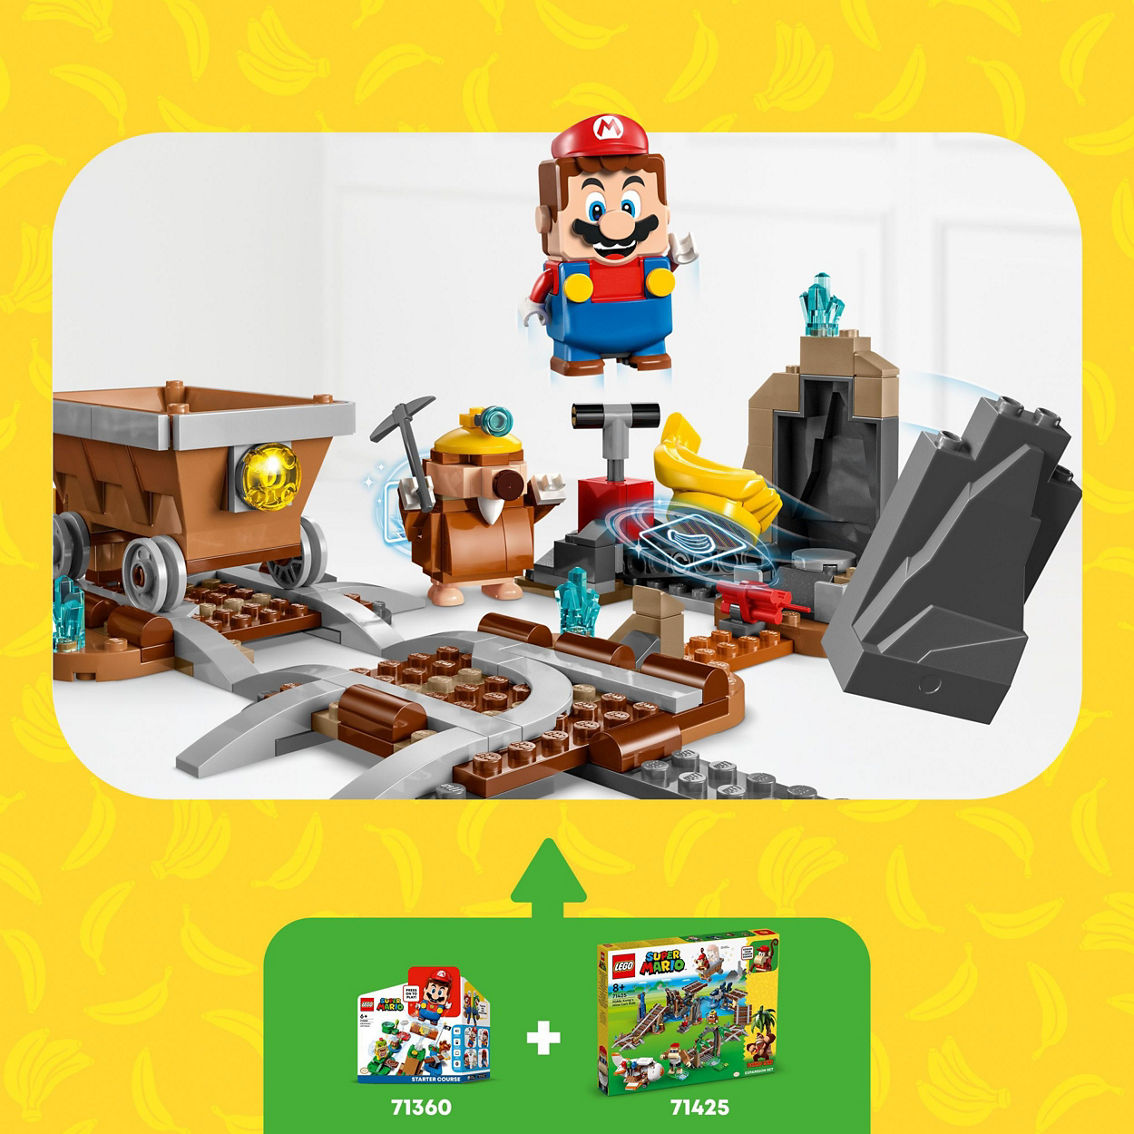 LEGO Super Mario Diddy Kong's Mine Cart Ride Expansion Set 71425 - Image 10 of 10